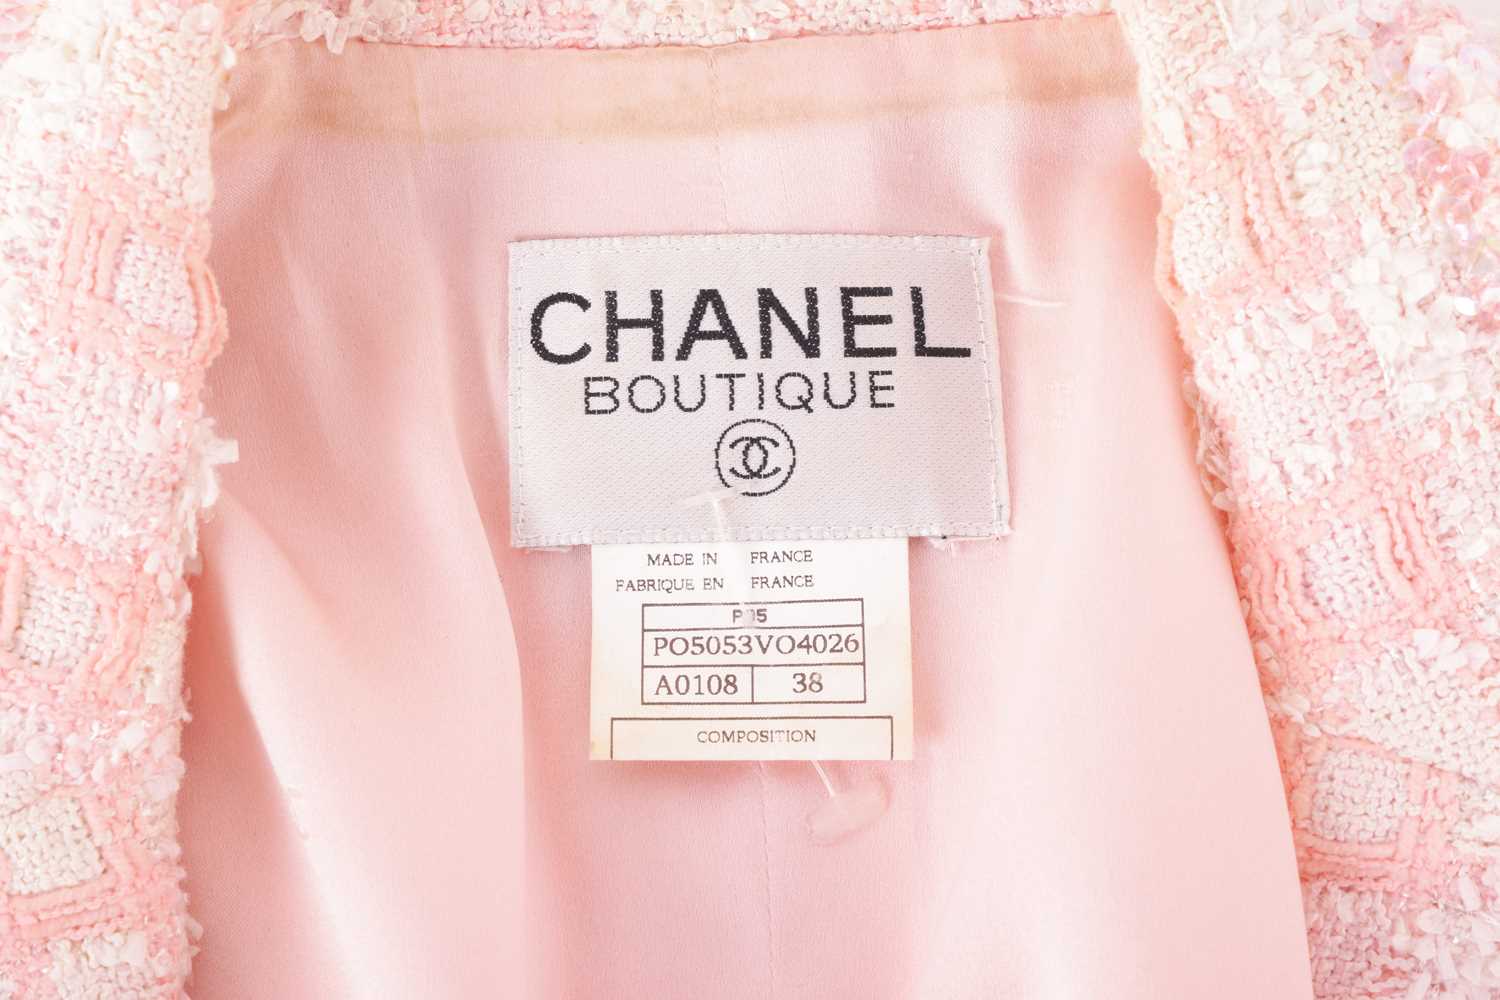 Chanel - a two-piece suit in peachy-pink tweed, from 1995 Spring and Summer ready-to-wear collection - Image 10 of 20